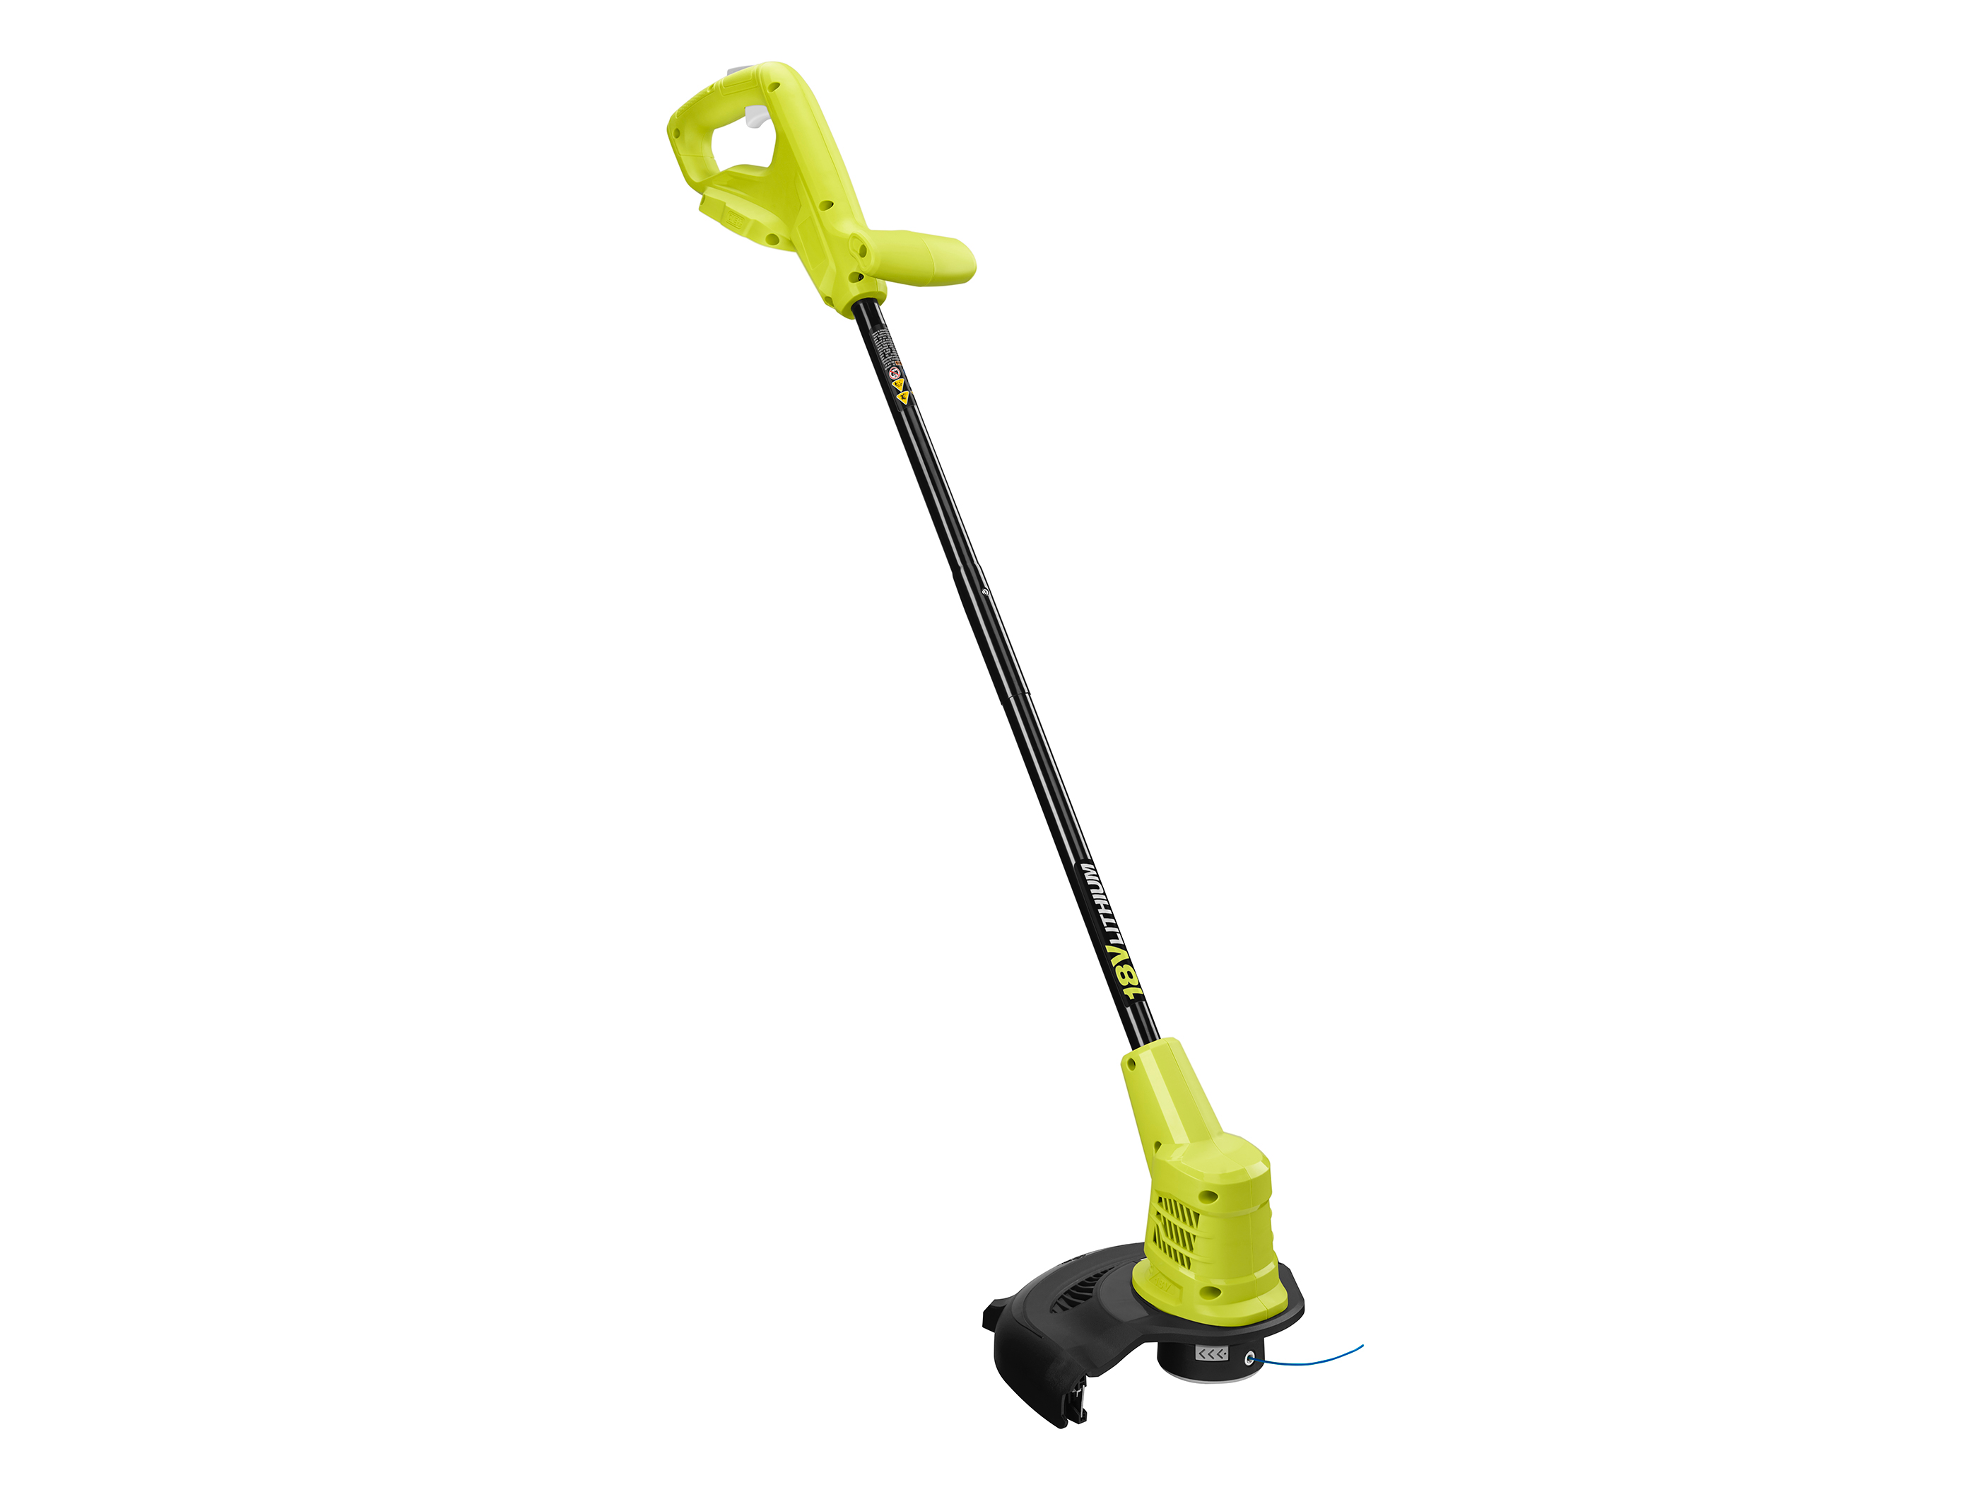 Product Features Image for 18V ONE+ LITHIUM-ION CORDLESS 10" STRING TRIMMER (TOOL ONLY).